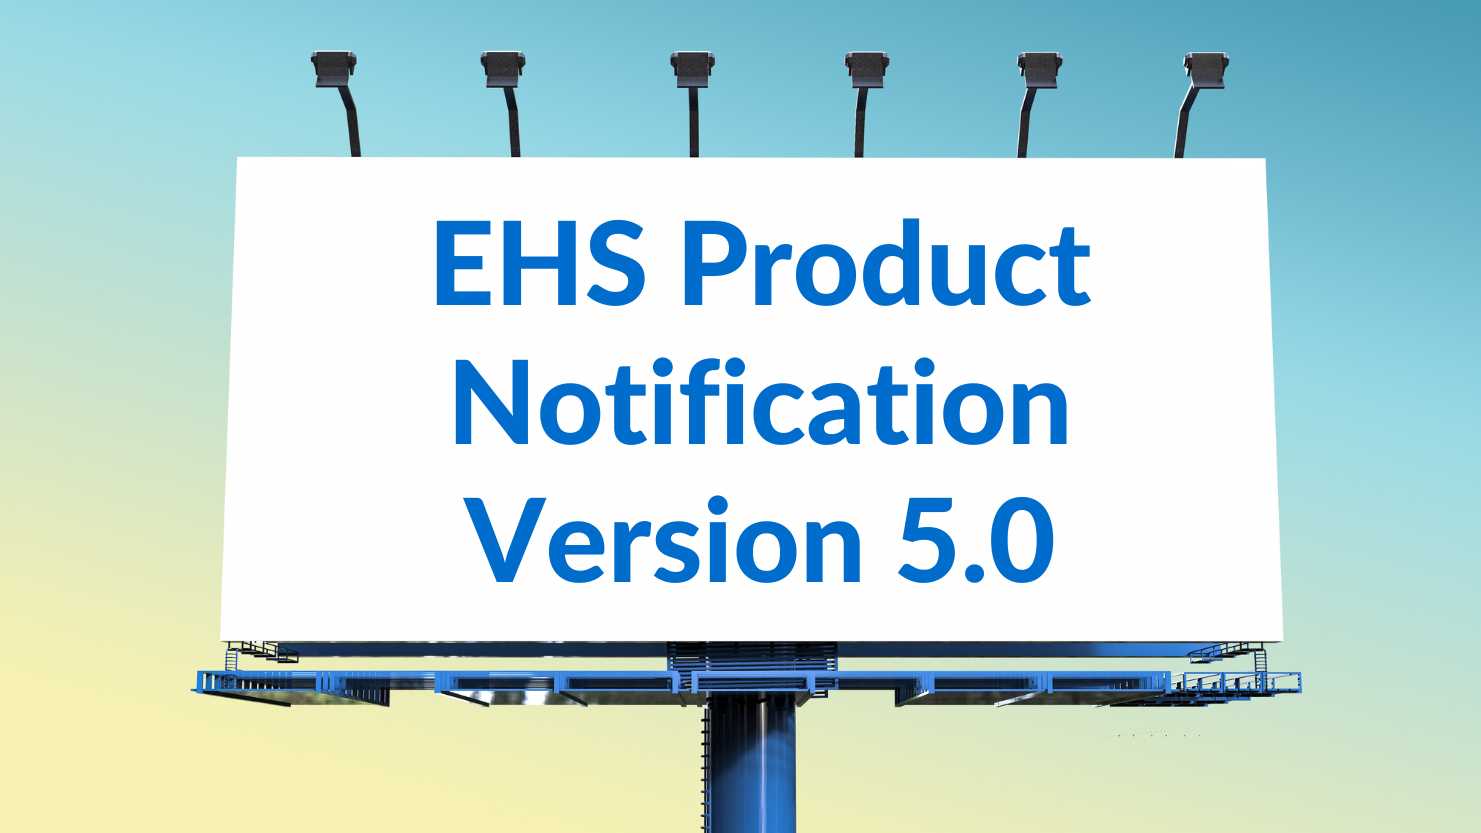 Billboard with EHS Product Notification 5.0